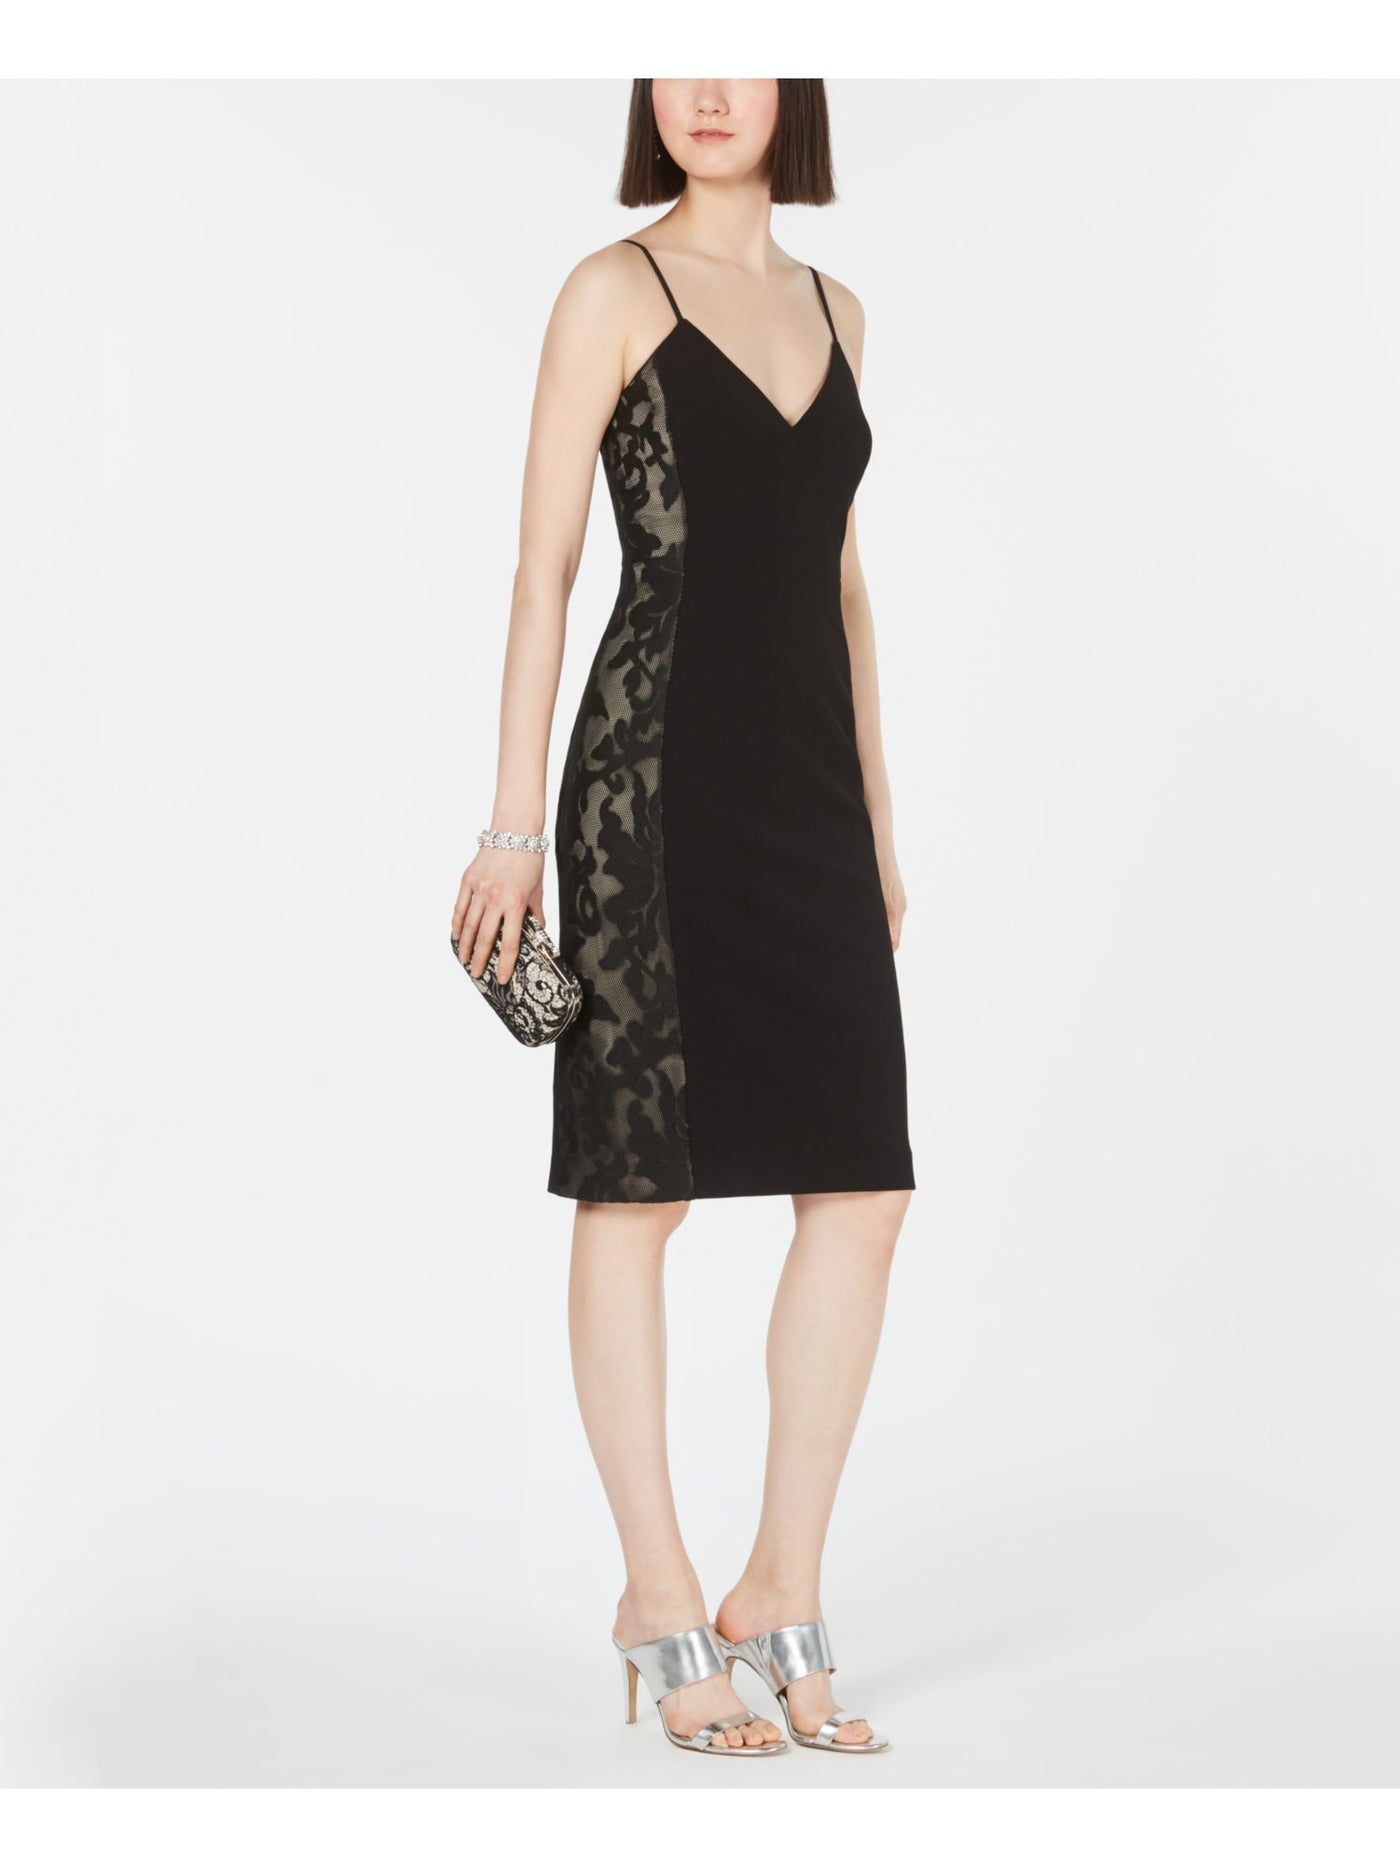 VINCE CAMUTO Womens Black Lace Inset Sleeveless V Neck Knee Length Cocktail Body Con Dress 4